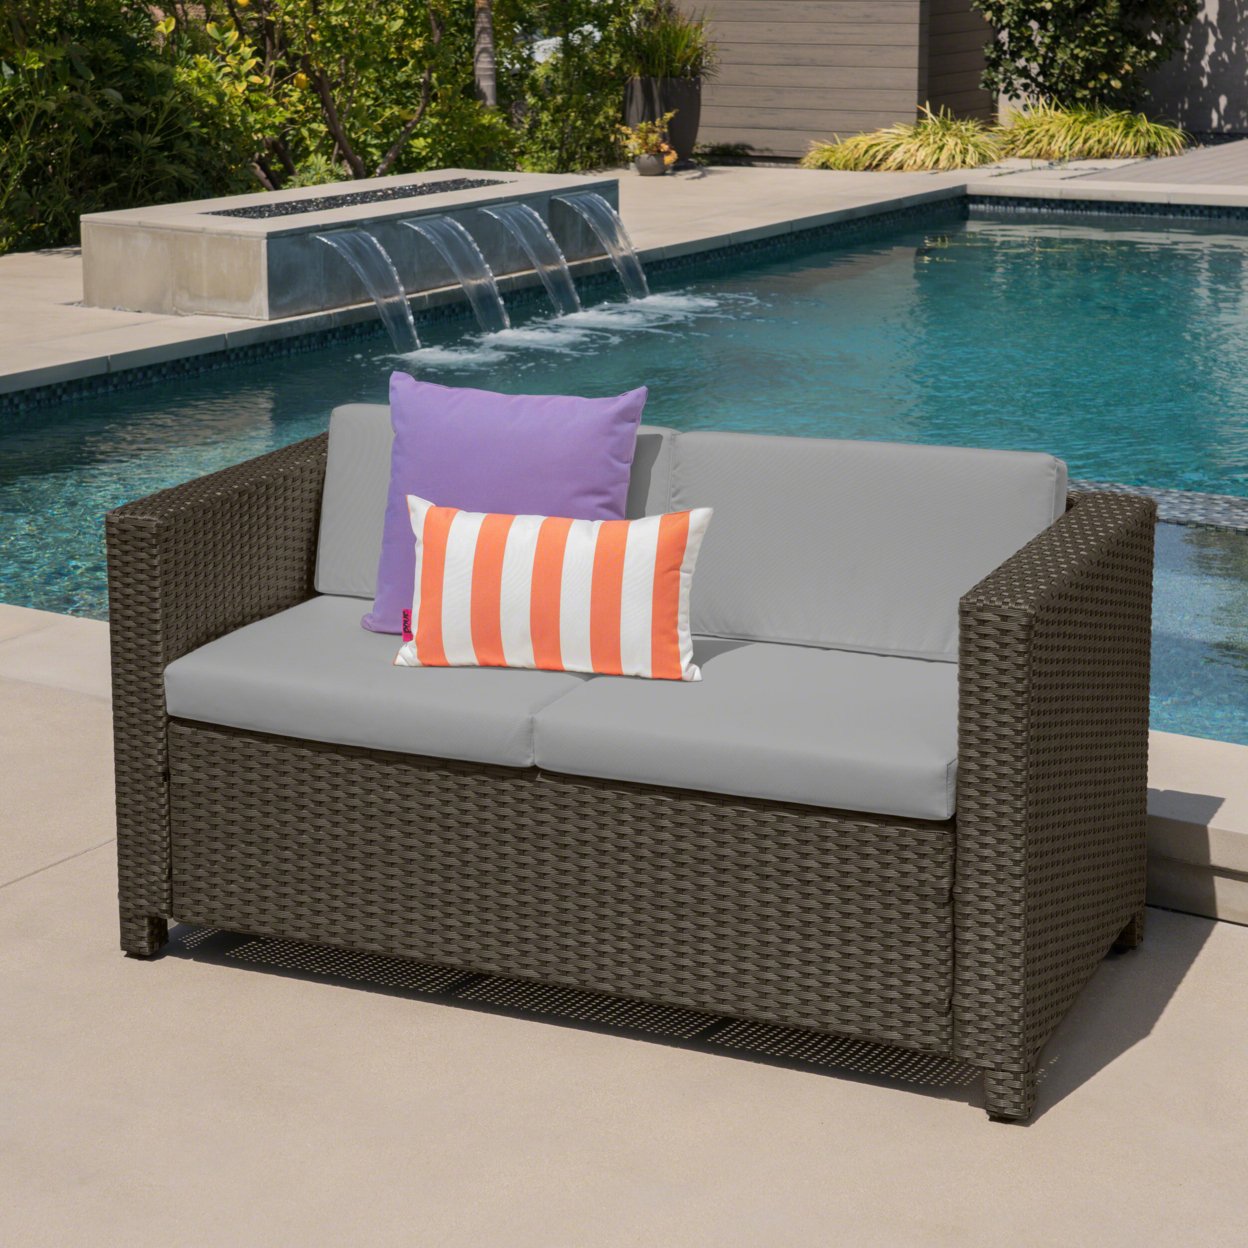 Lorelei Outdoor Wicker Loveseat With Water Resistant Cushions - Gray/Mixed Black